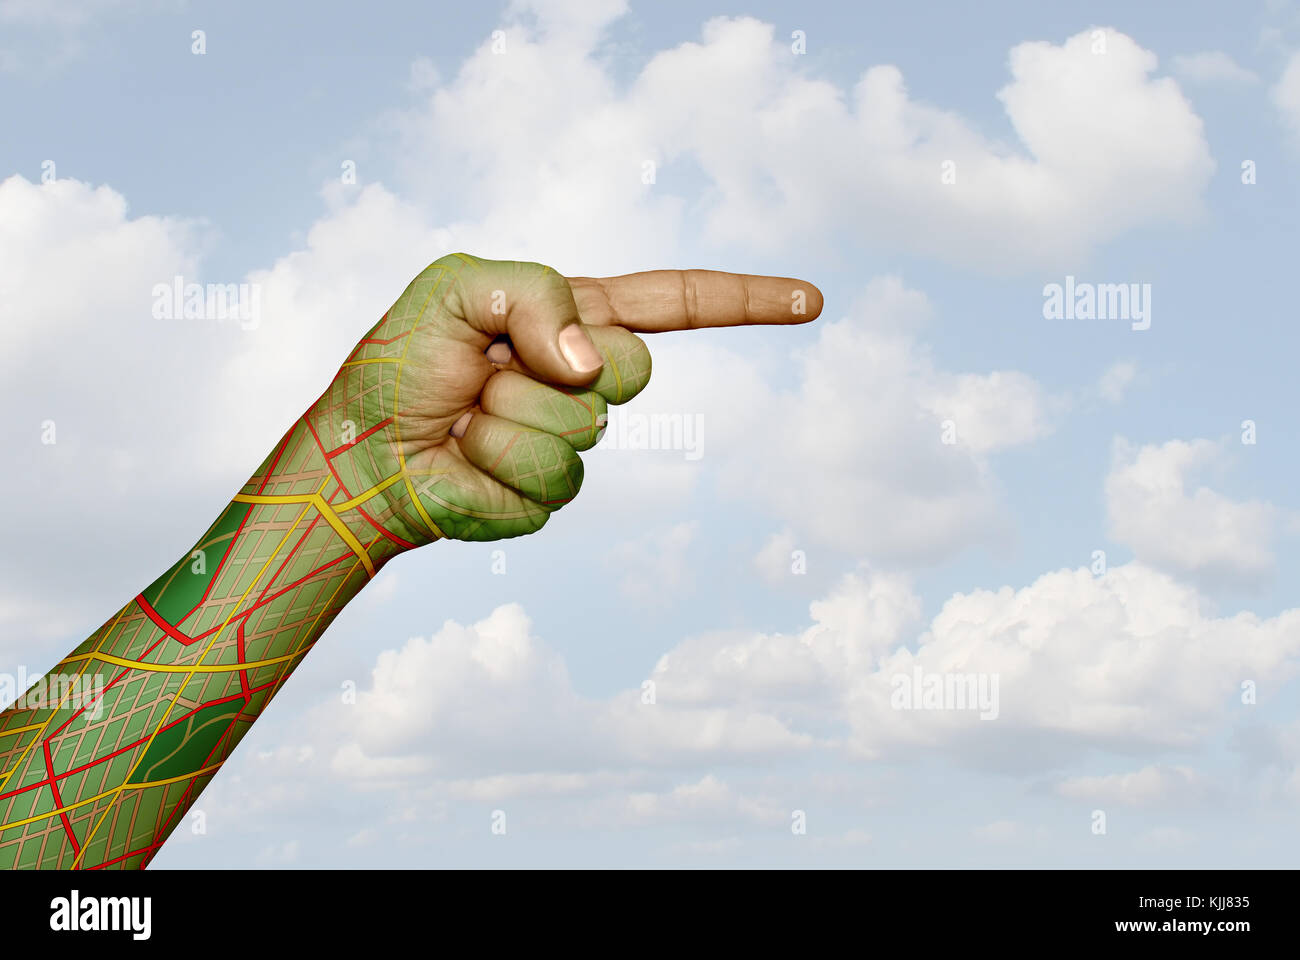 Human direction and consultation concept as a hand with a tattoo of navigation graphics pointing towards a solution in a 3D illustration style. Stock Photo